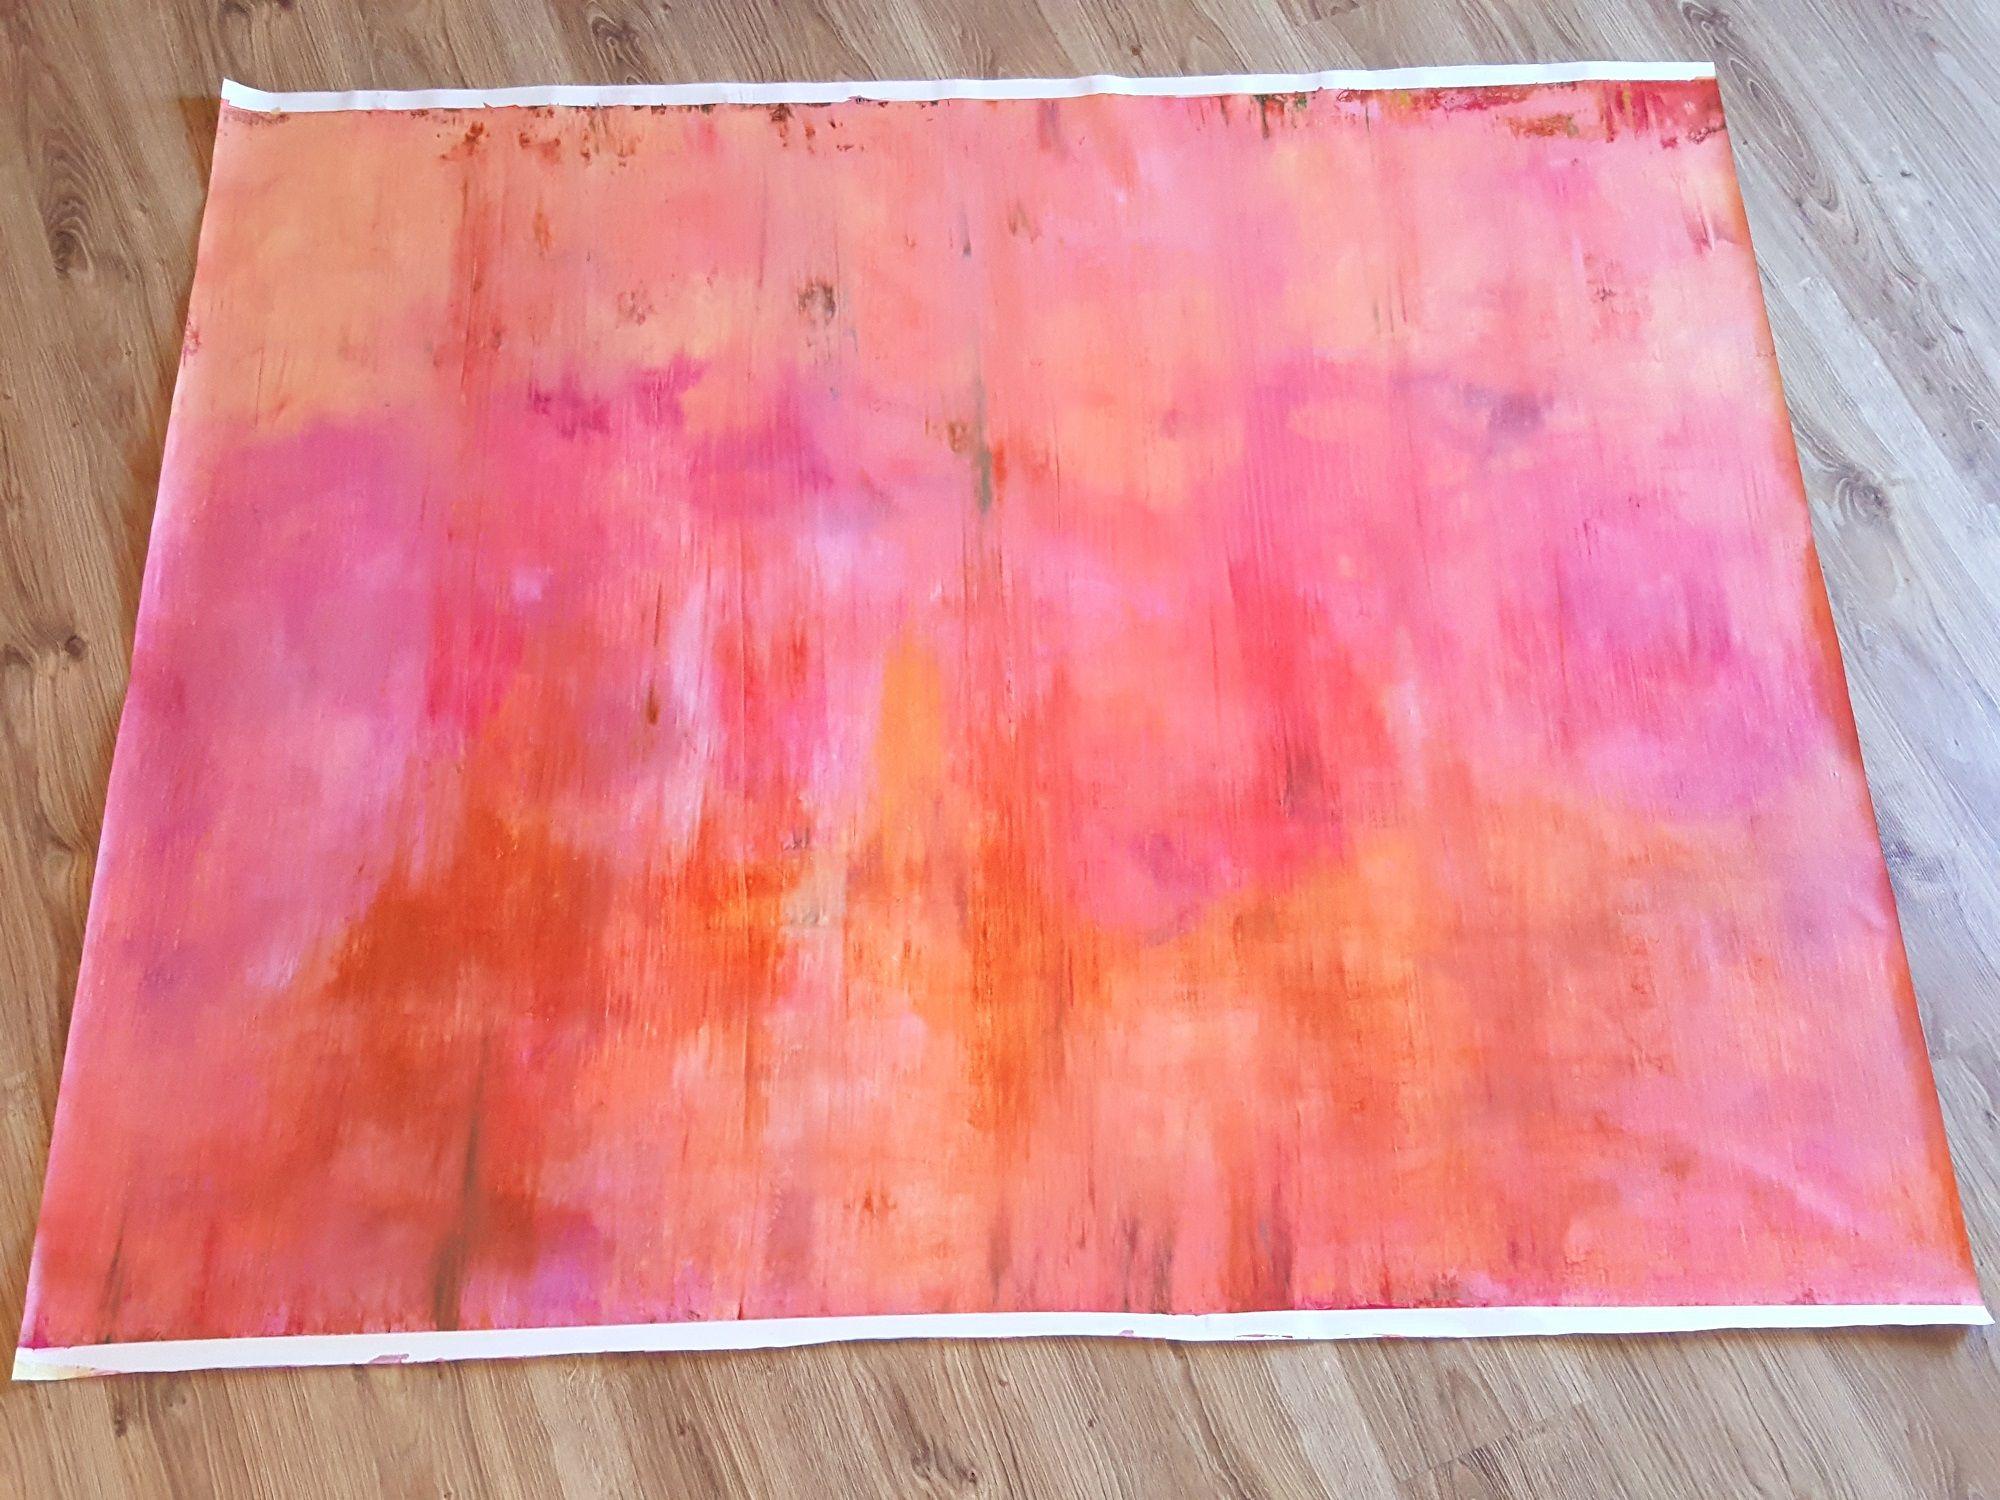 In the pink fog - XXL abstract, Painting, Acrylic on Canvas 1